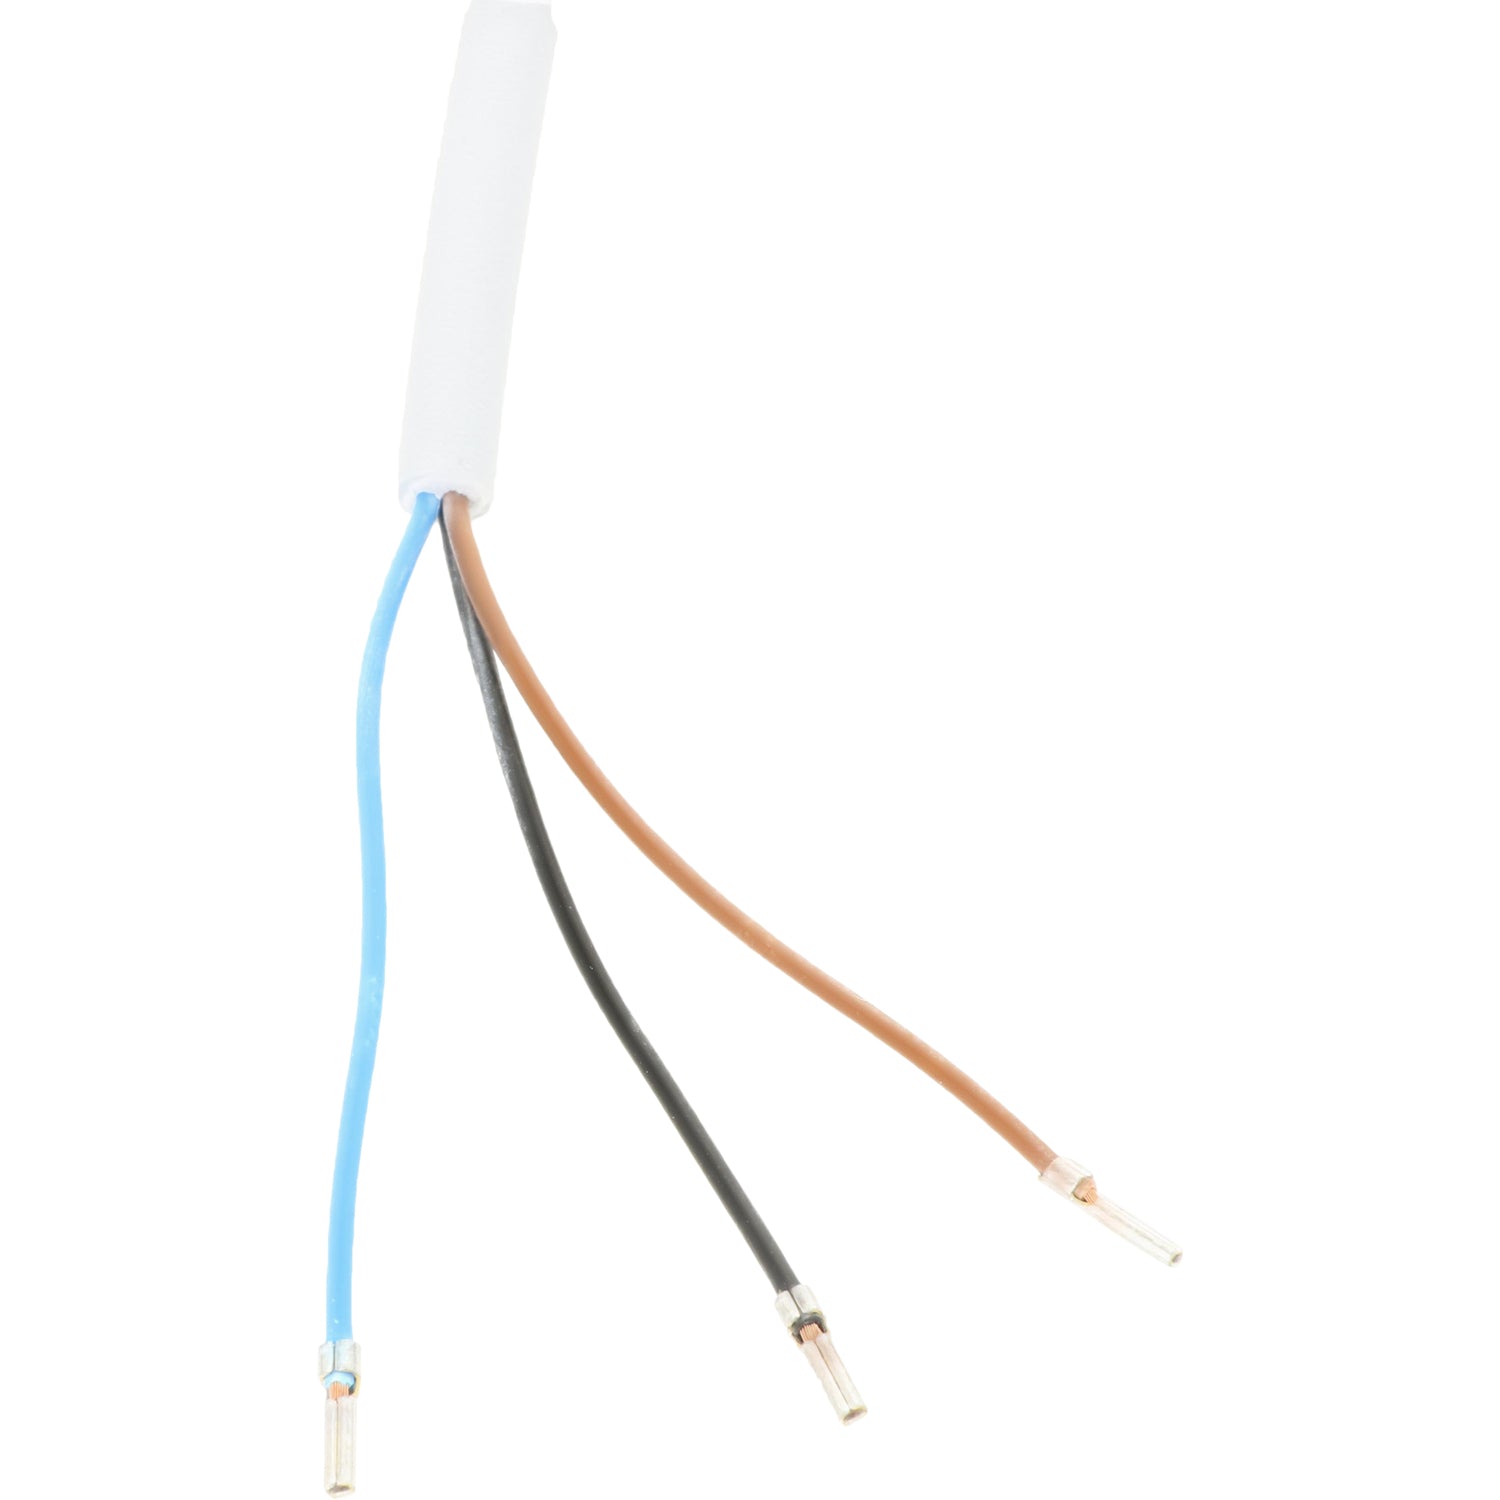 Grey connecting cable with exposed black, blue, and brown wires on white background.